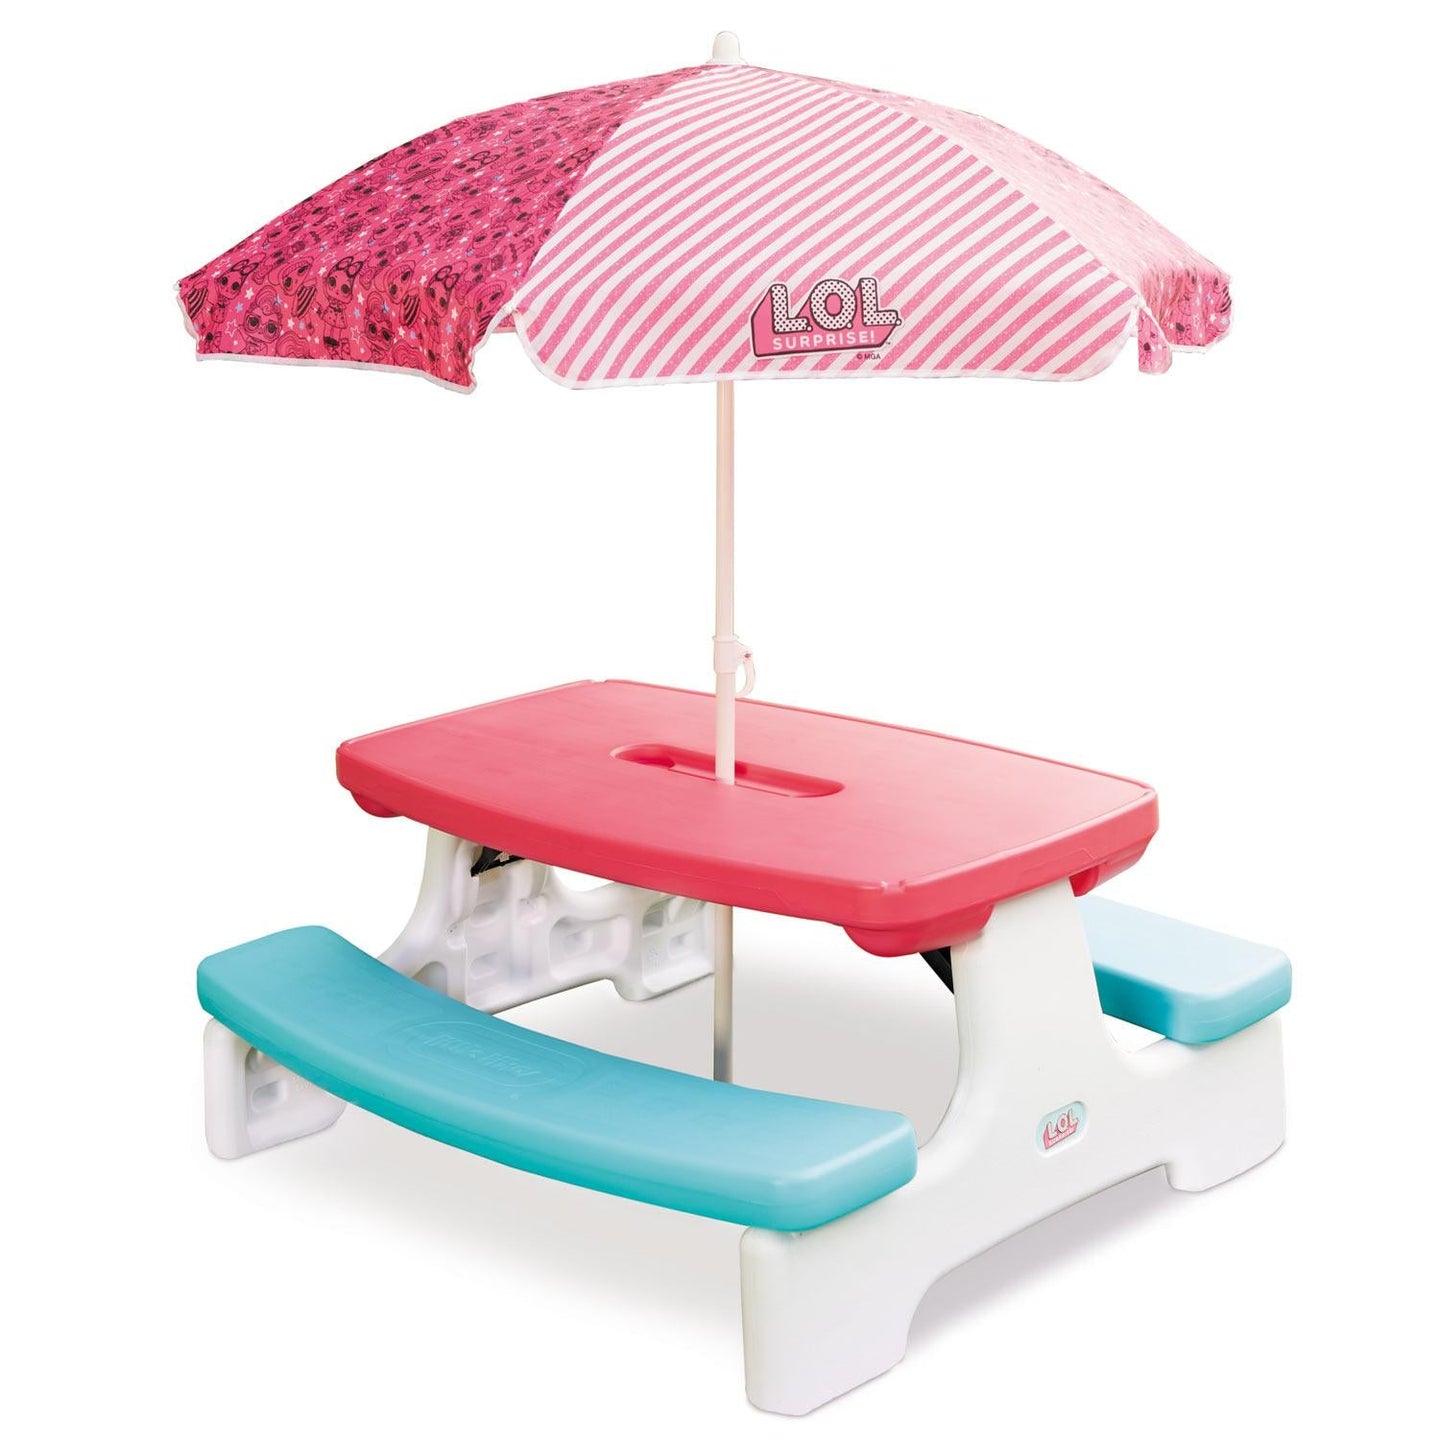 LOL SURPRISE™ BIRTHDAY PARTY TABLE WITH UMBRELLA